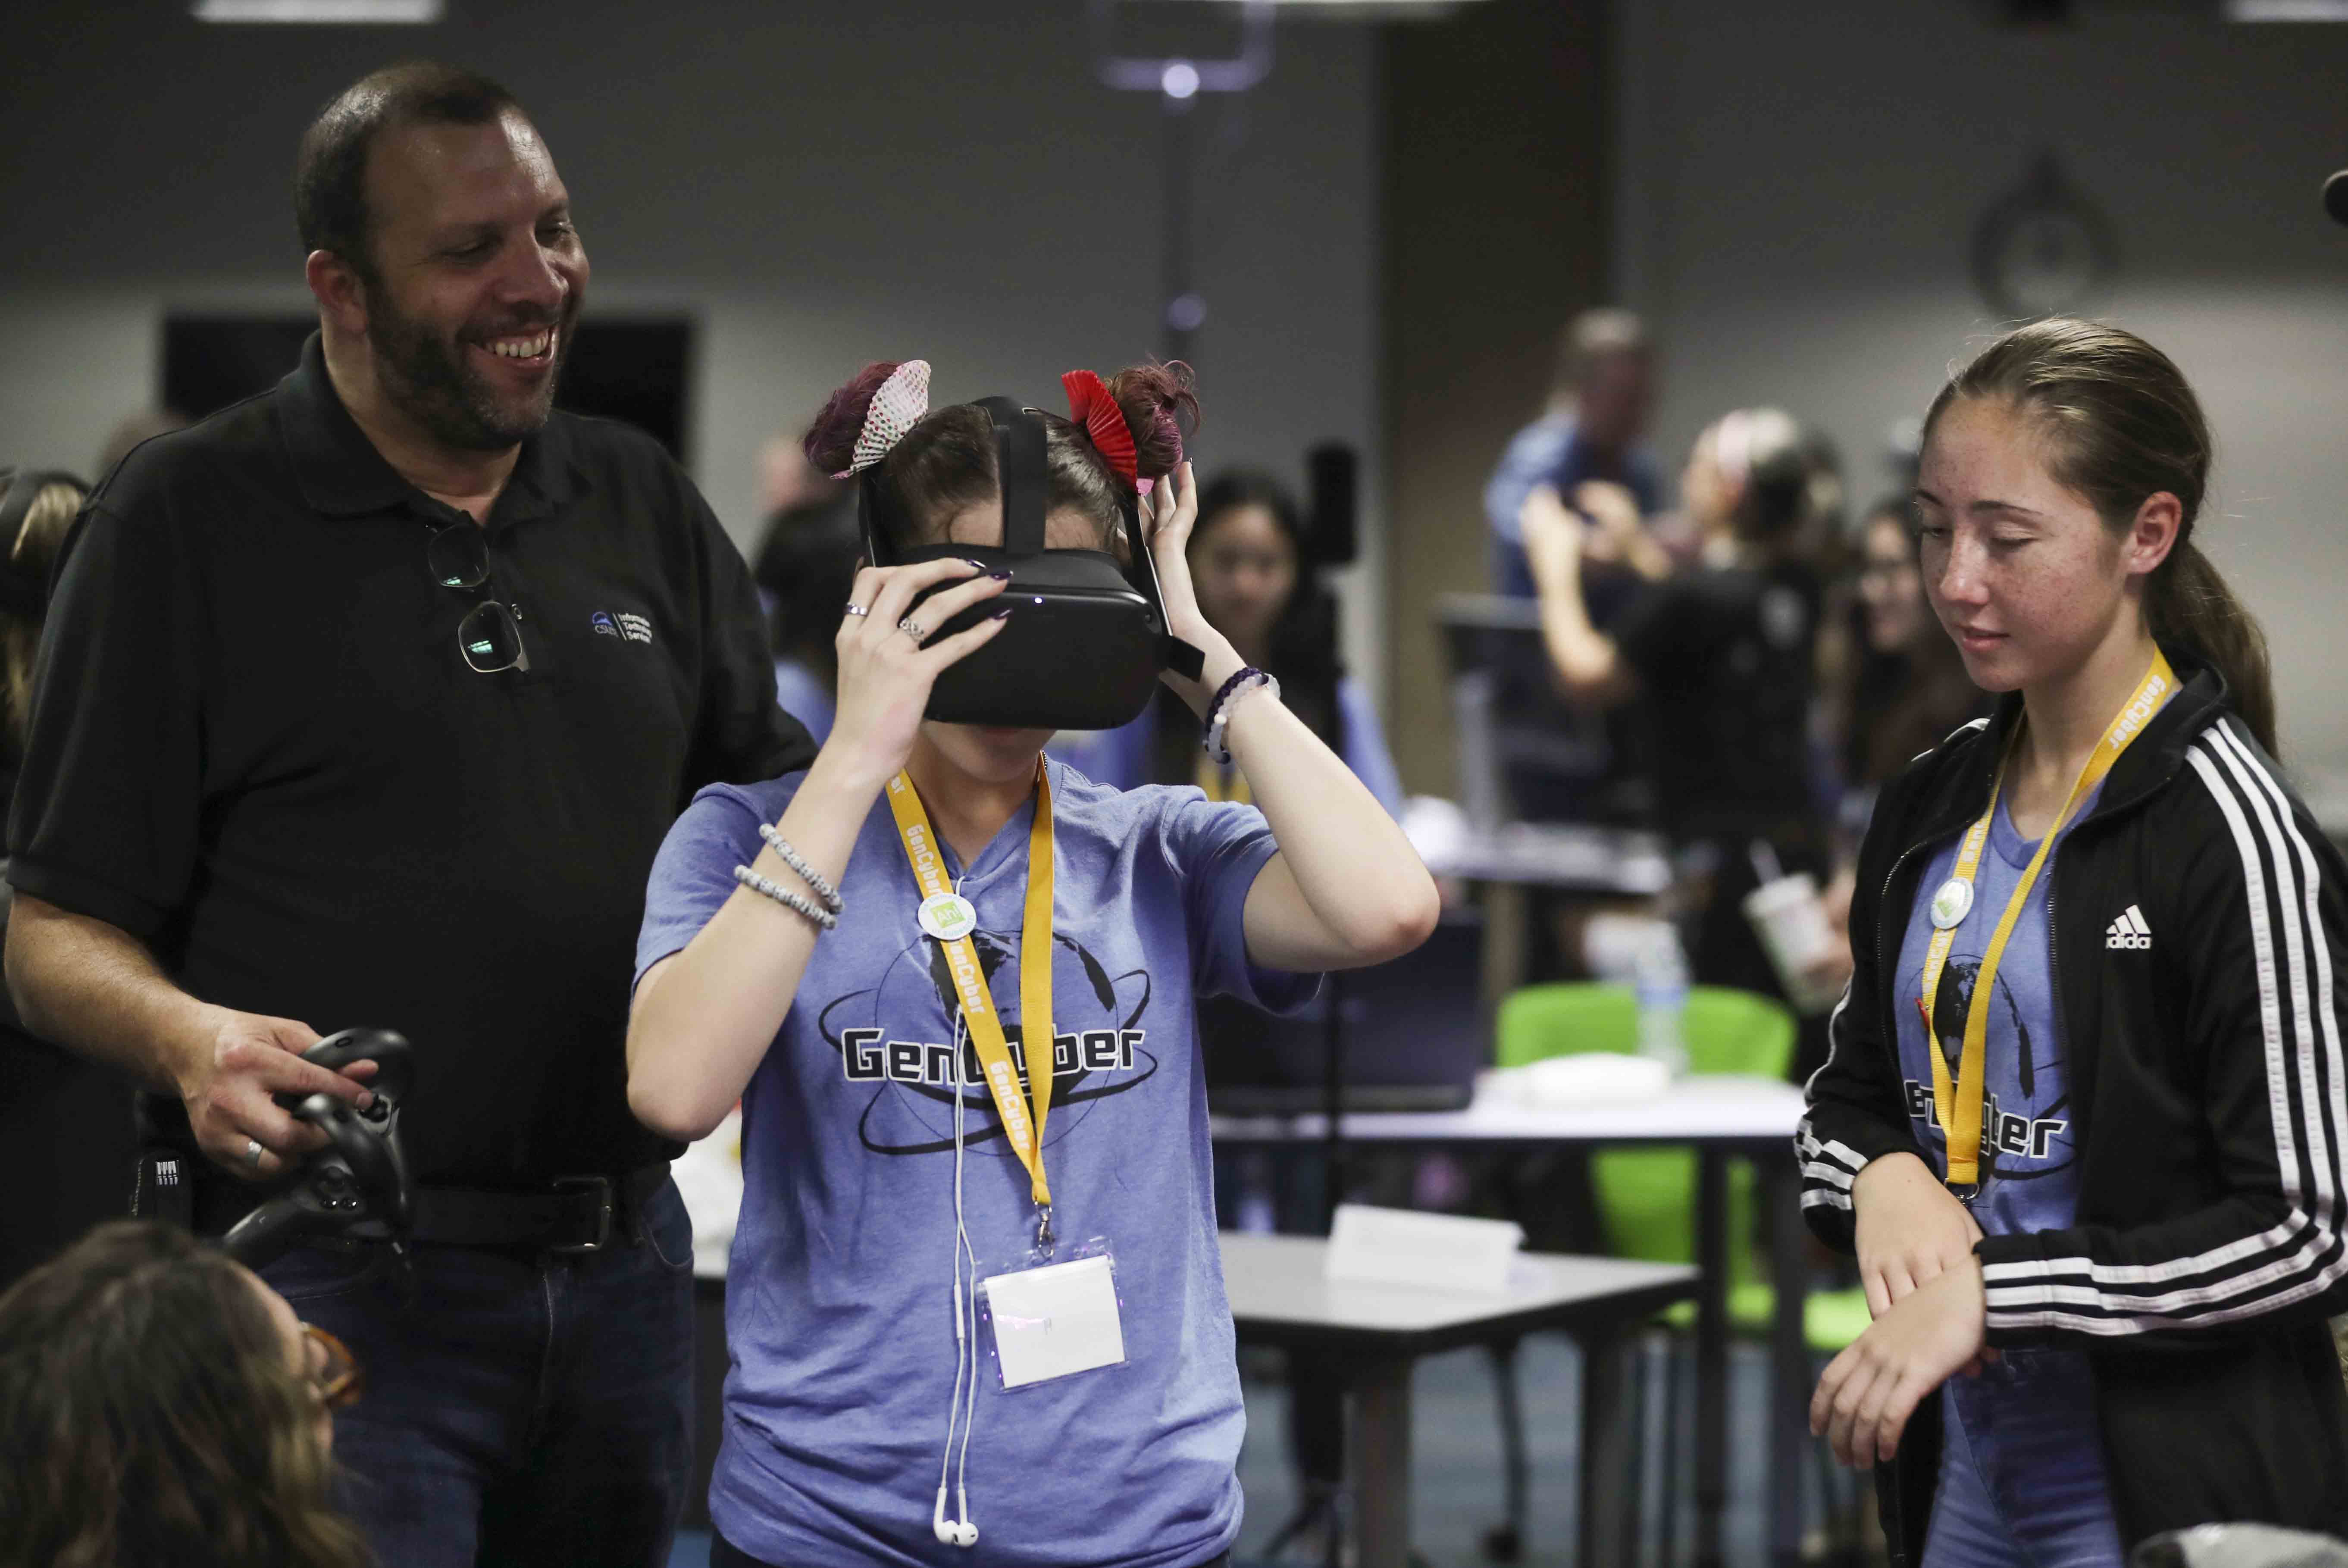 Checking out a virtual reality headset at GenCyber camp.